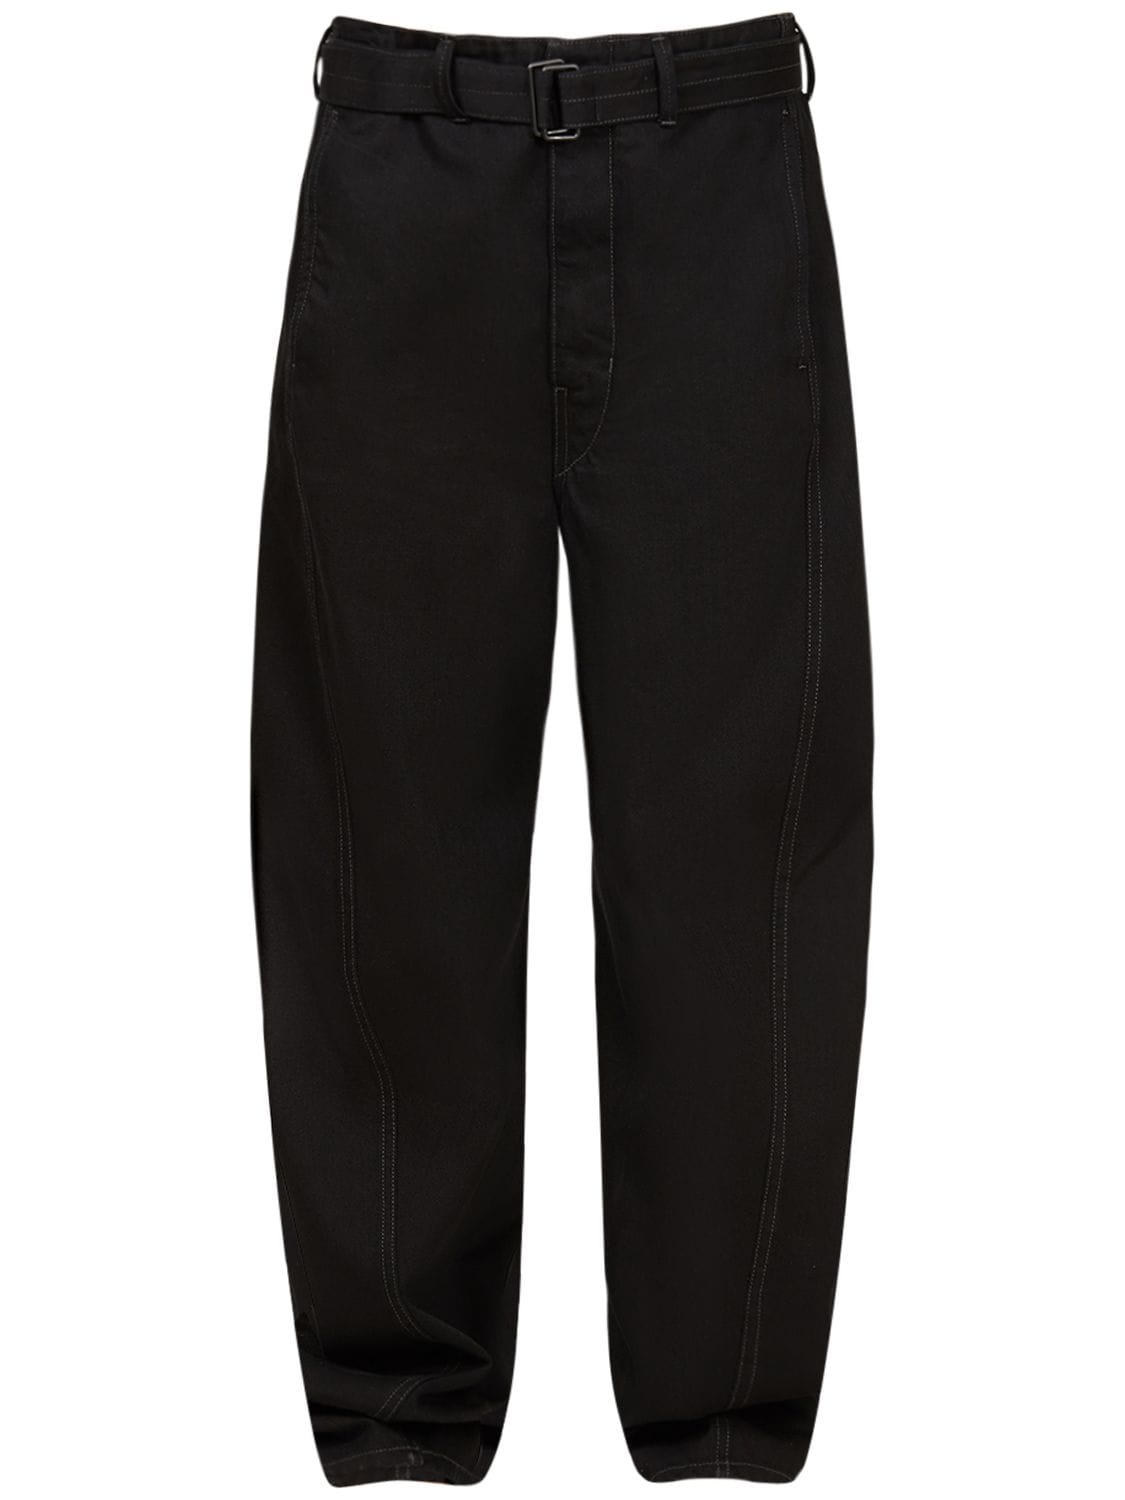 Lemaire - Twisted belted cotton wide pants - Black | Luisaviaroma